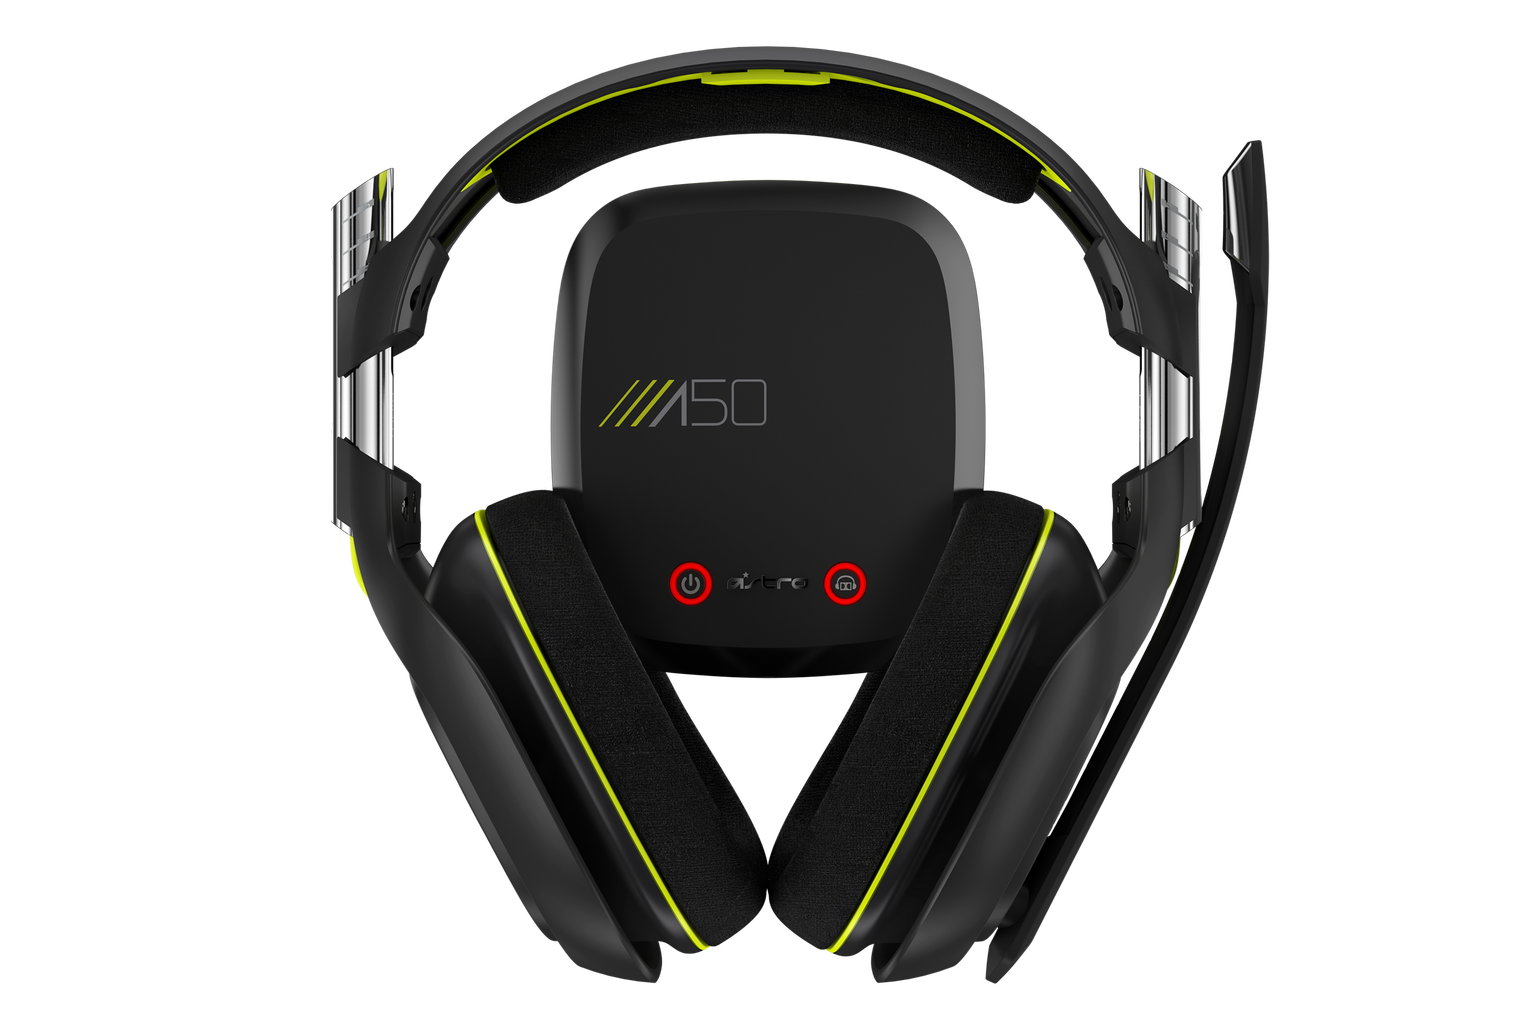 Astro A50 review Still king of wireless headsets, still expensive